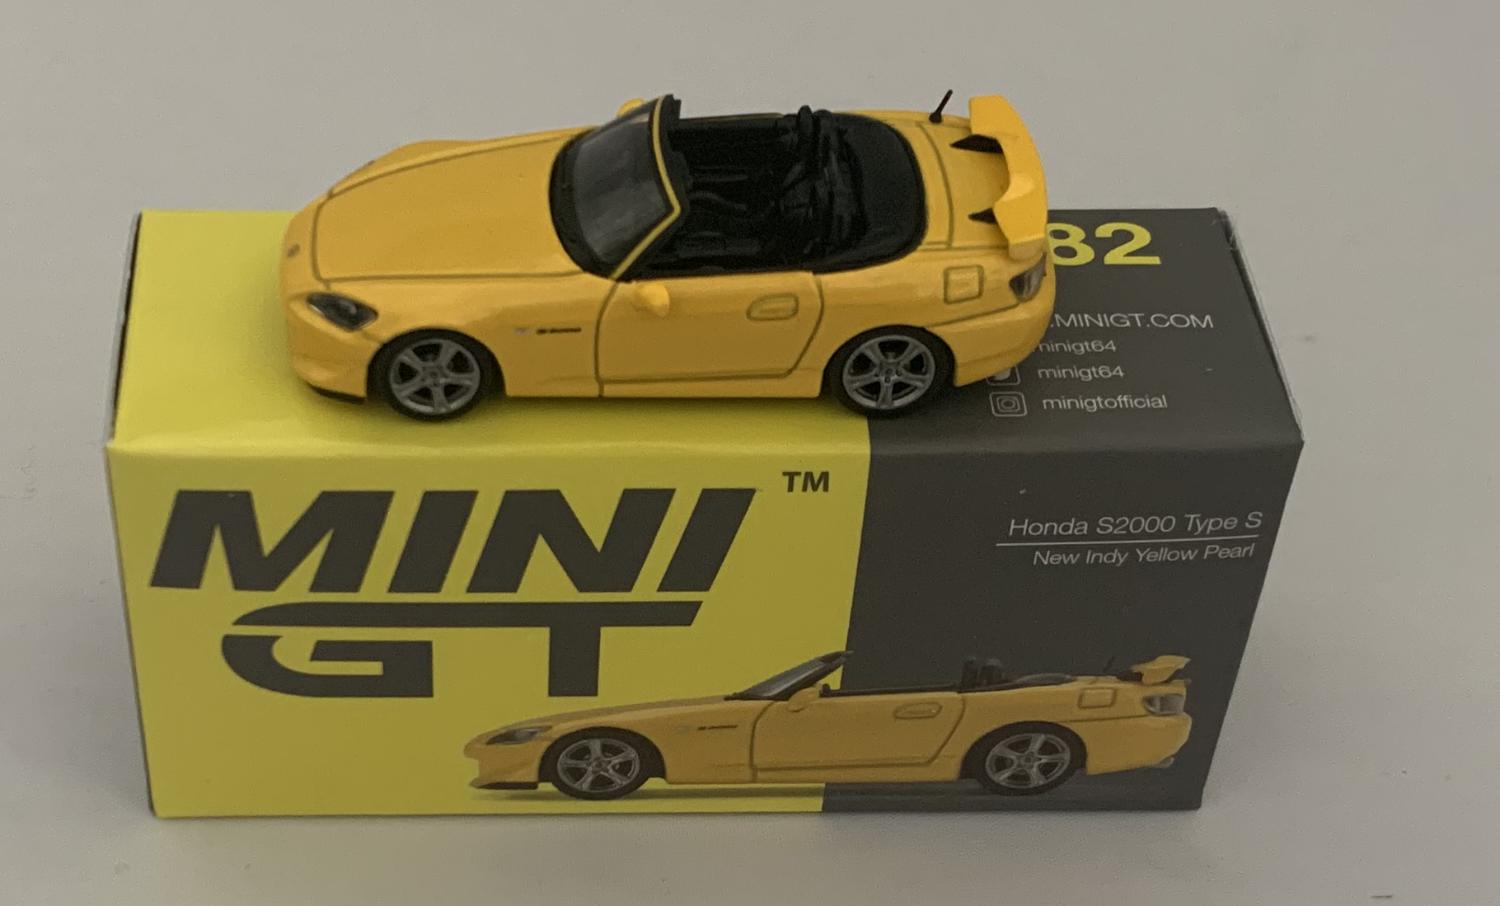 A good reproduction of the Honda S2000 Type S with detail throughout, all authentically recreated.  The model is presented in a box, the car is approx. 6.5 cm long and the box is 10 cm long